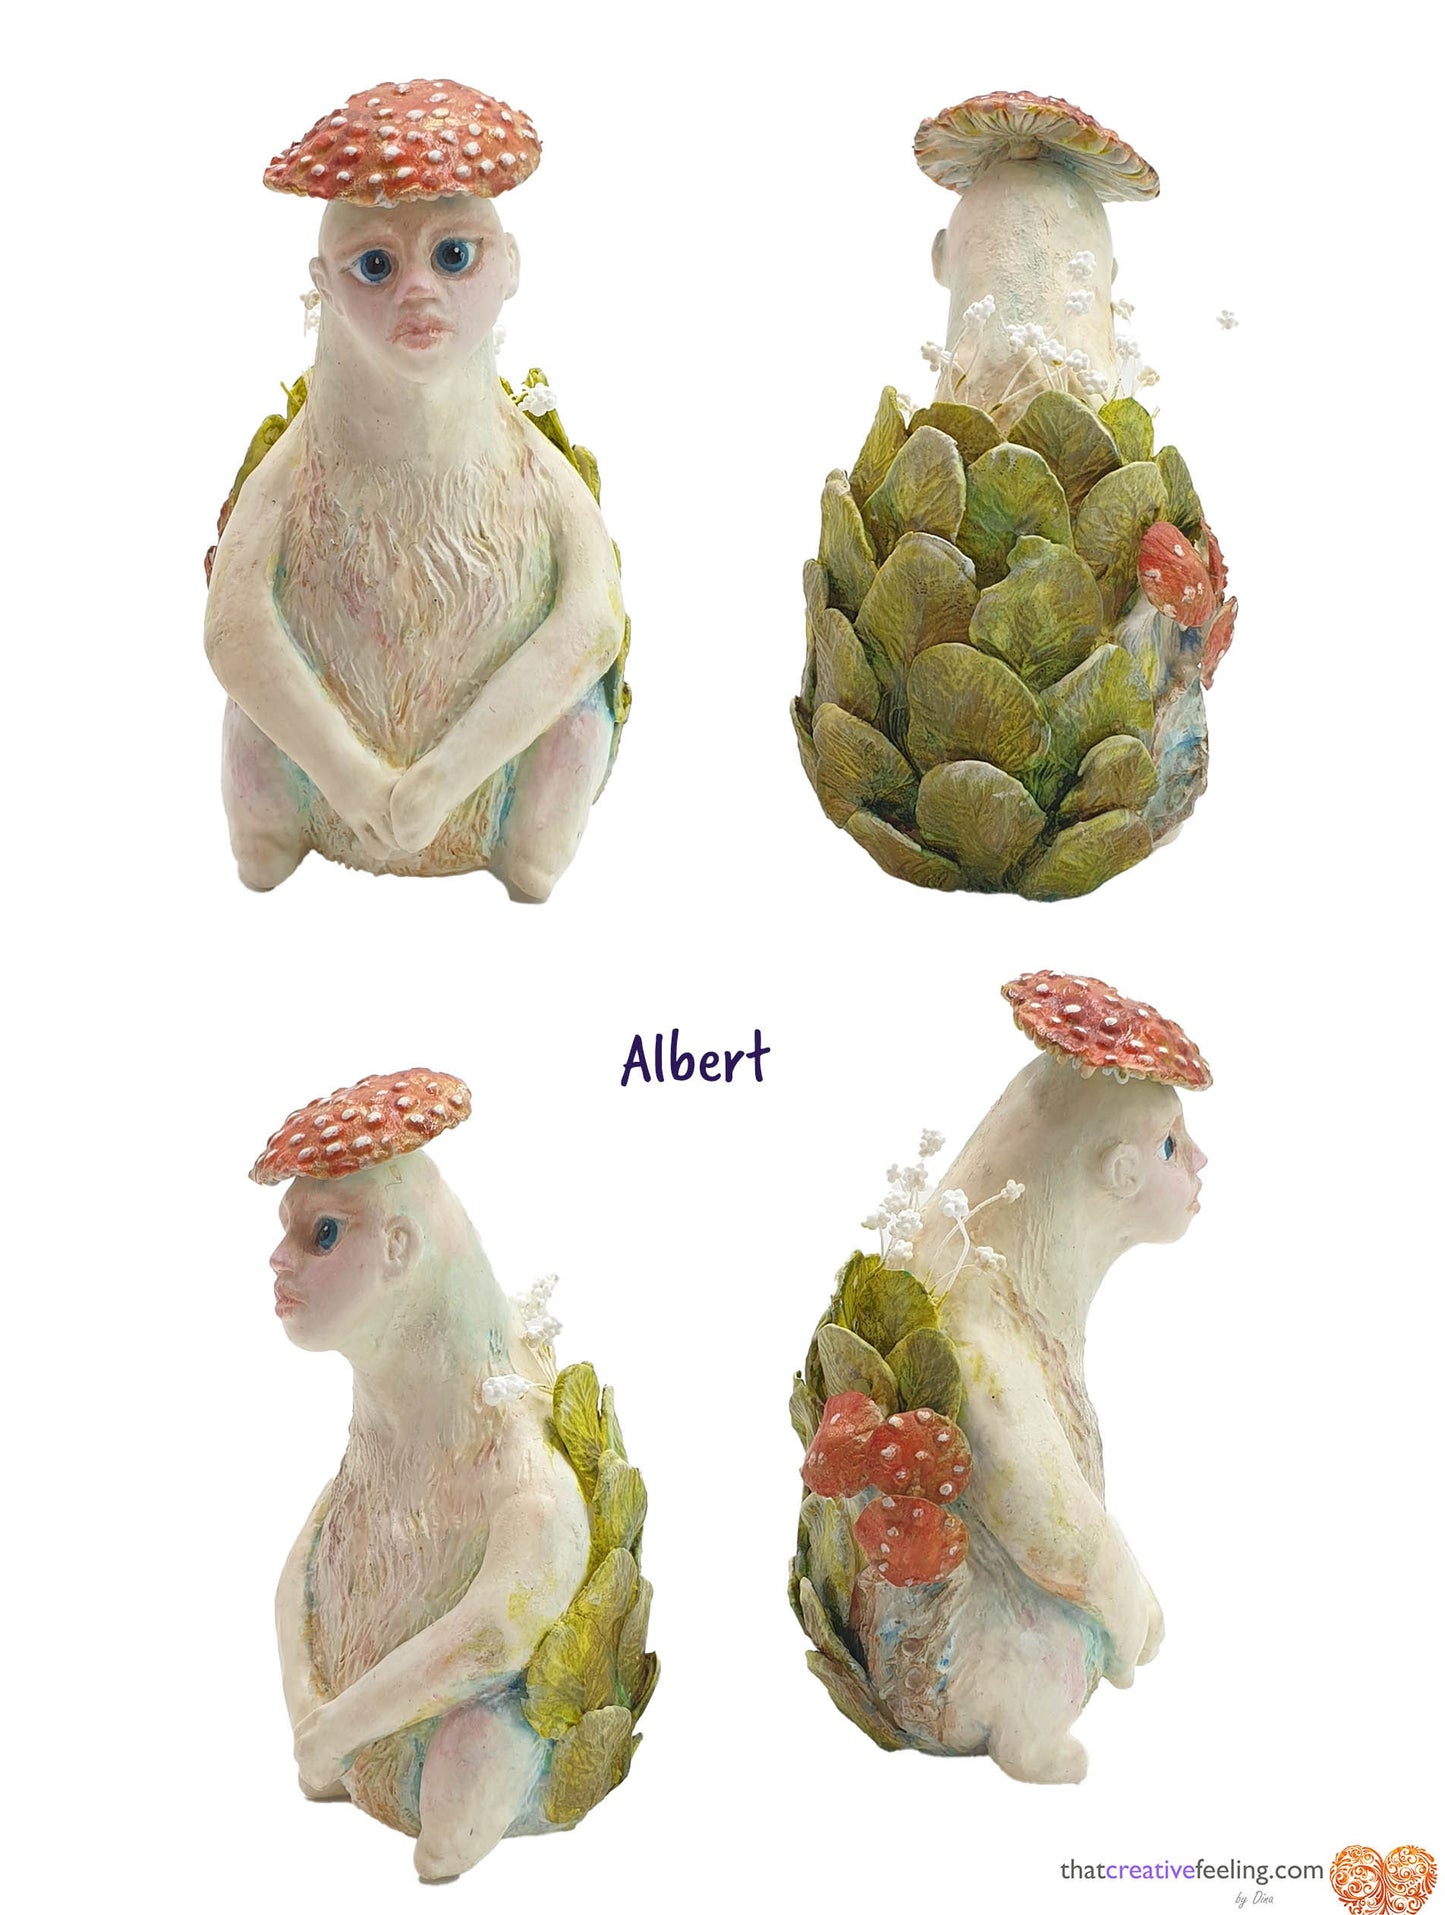 Minchkins - miniature stone clay art dolls, surreal tiny forest creatures, collectible art doll